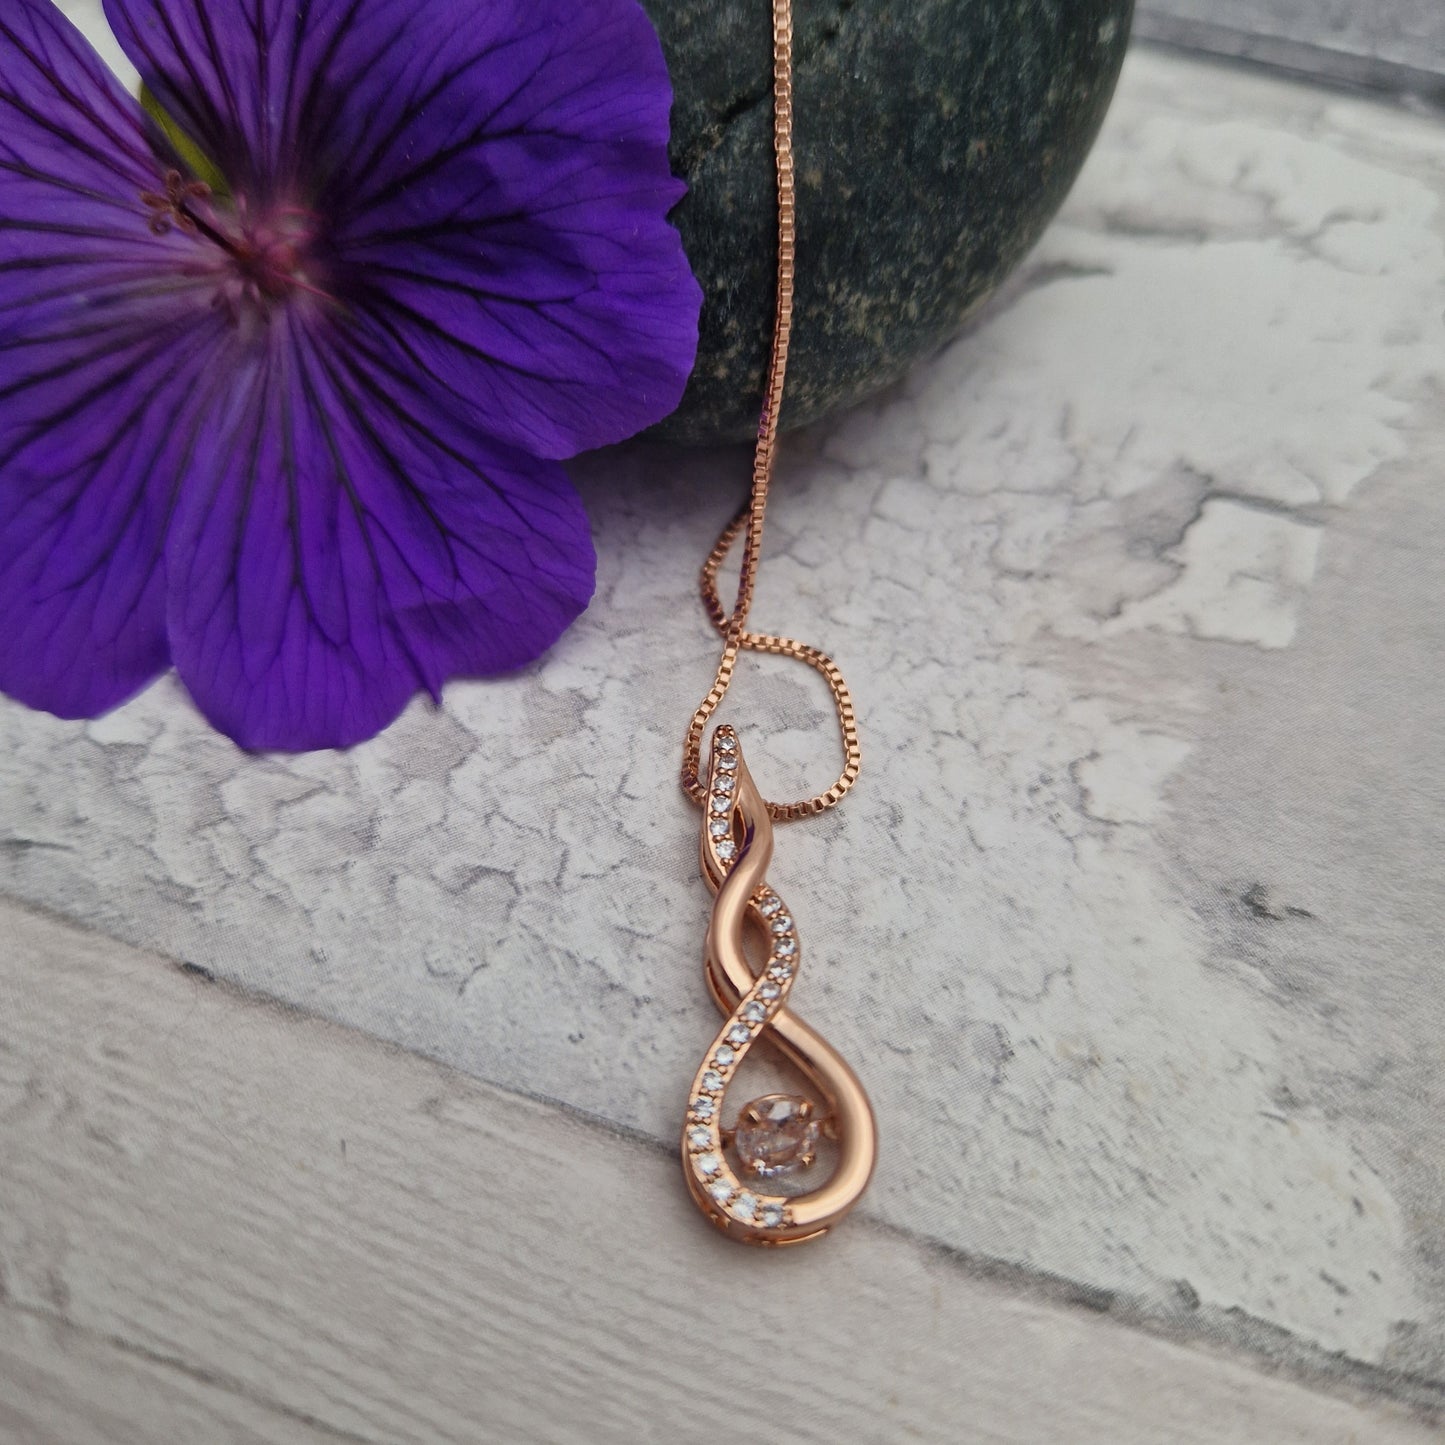 Rose gold plated pendant in a twist pattern, decorated with diamante crystals.